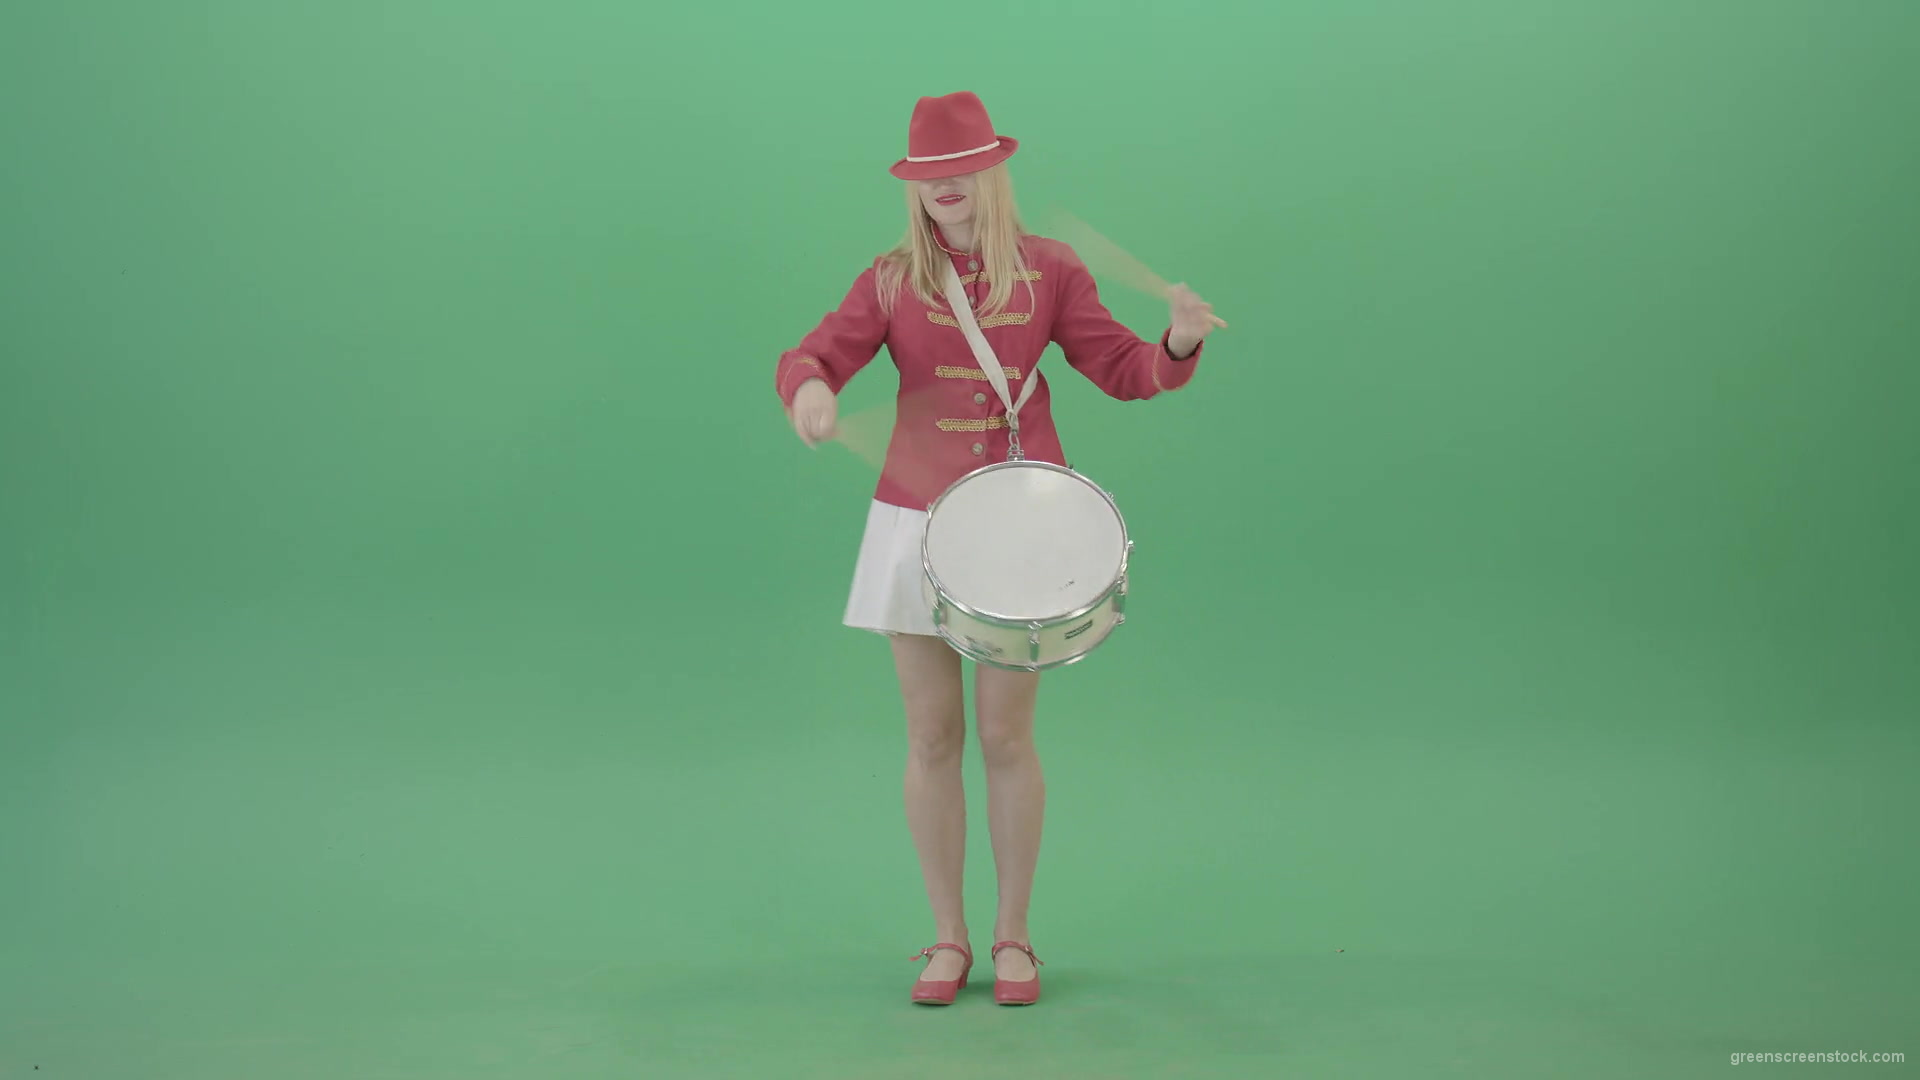 Blonde-Girl-playing-snare-drum-fast-and-marching-on-green-screen-4K-Video-Footage-1920_005 Green Screen Stock